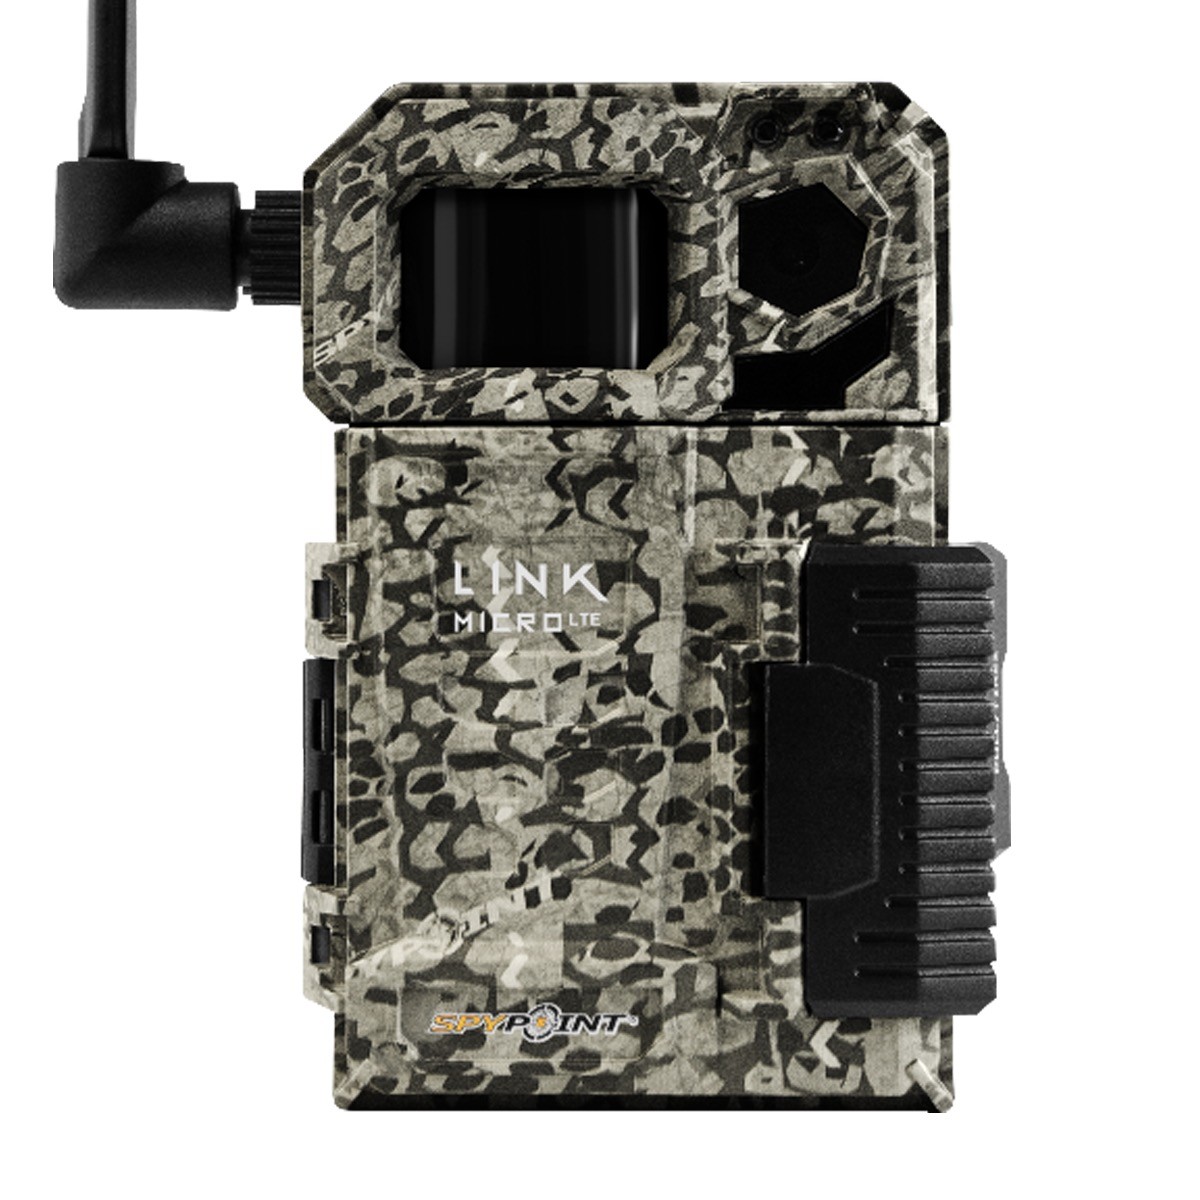 Details about   4G Antenna For Spypoint Link-Micro&Tactacam Reveal Cellular Trail Camera Verizon 